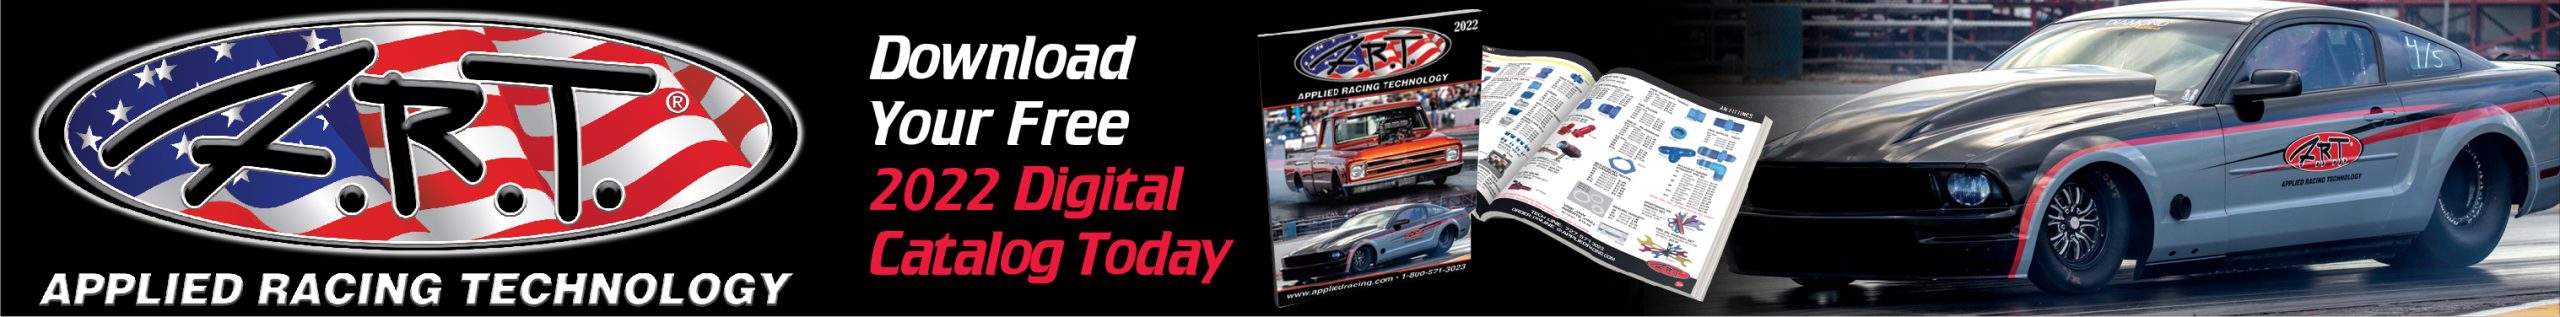 Home - Drag Illustrated | Drag Racing News, Opinion, Interviews, Photos ...